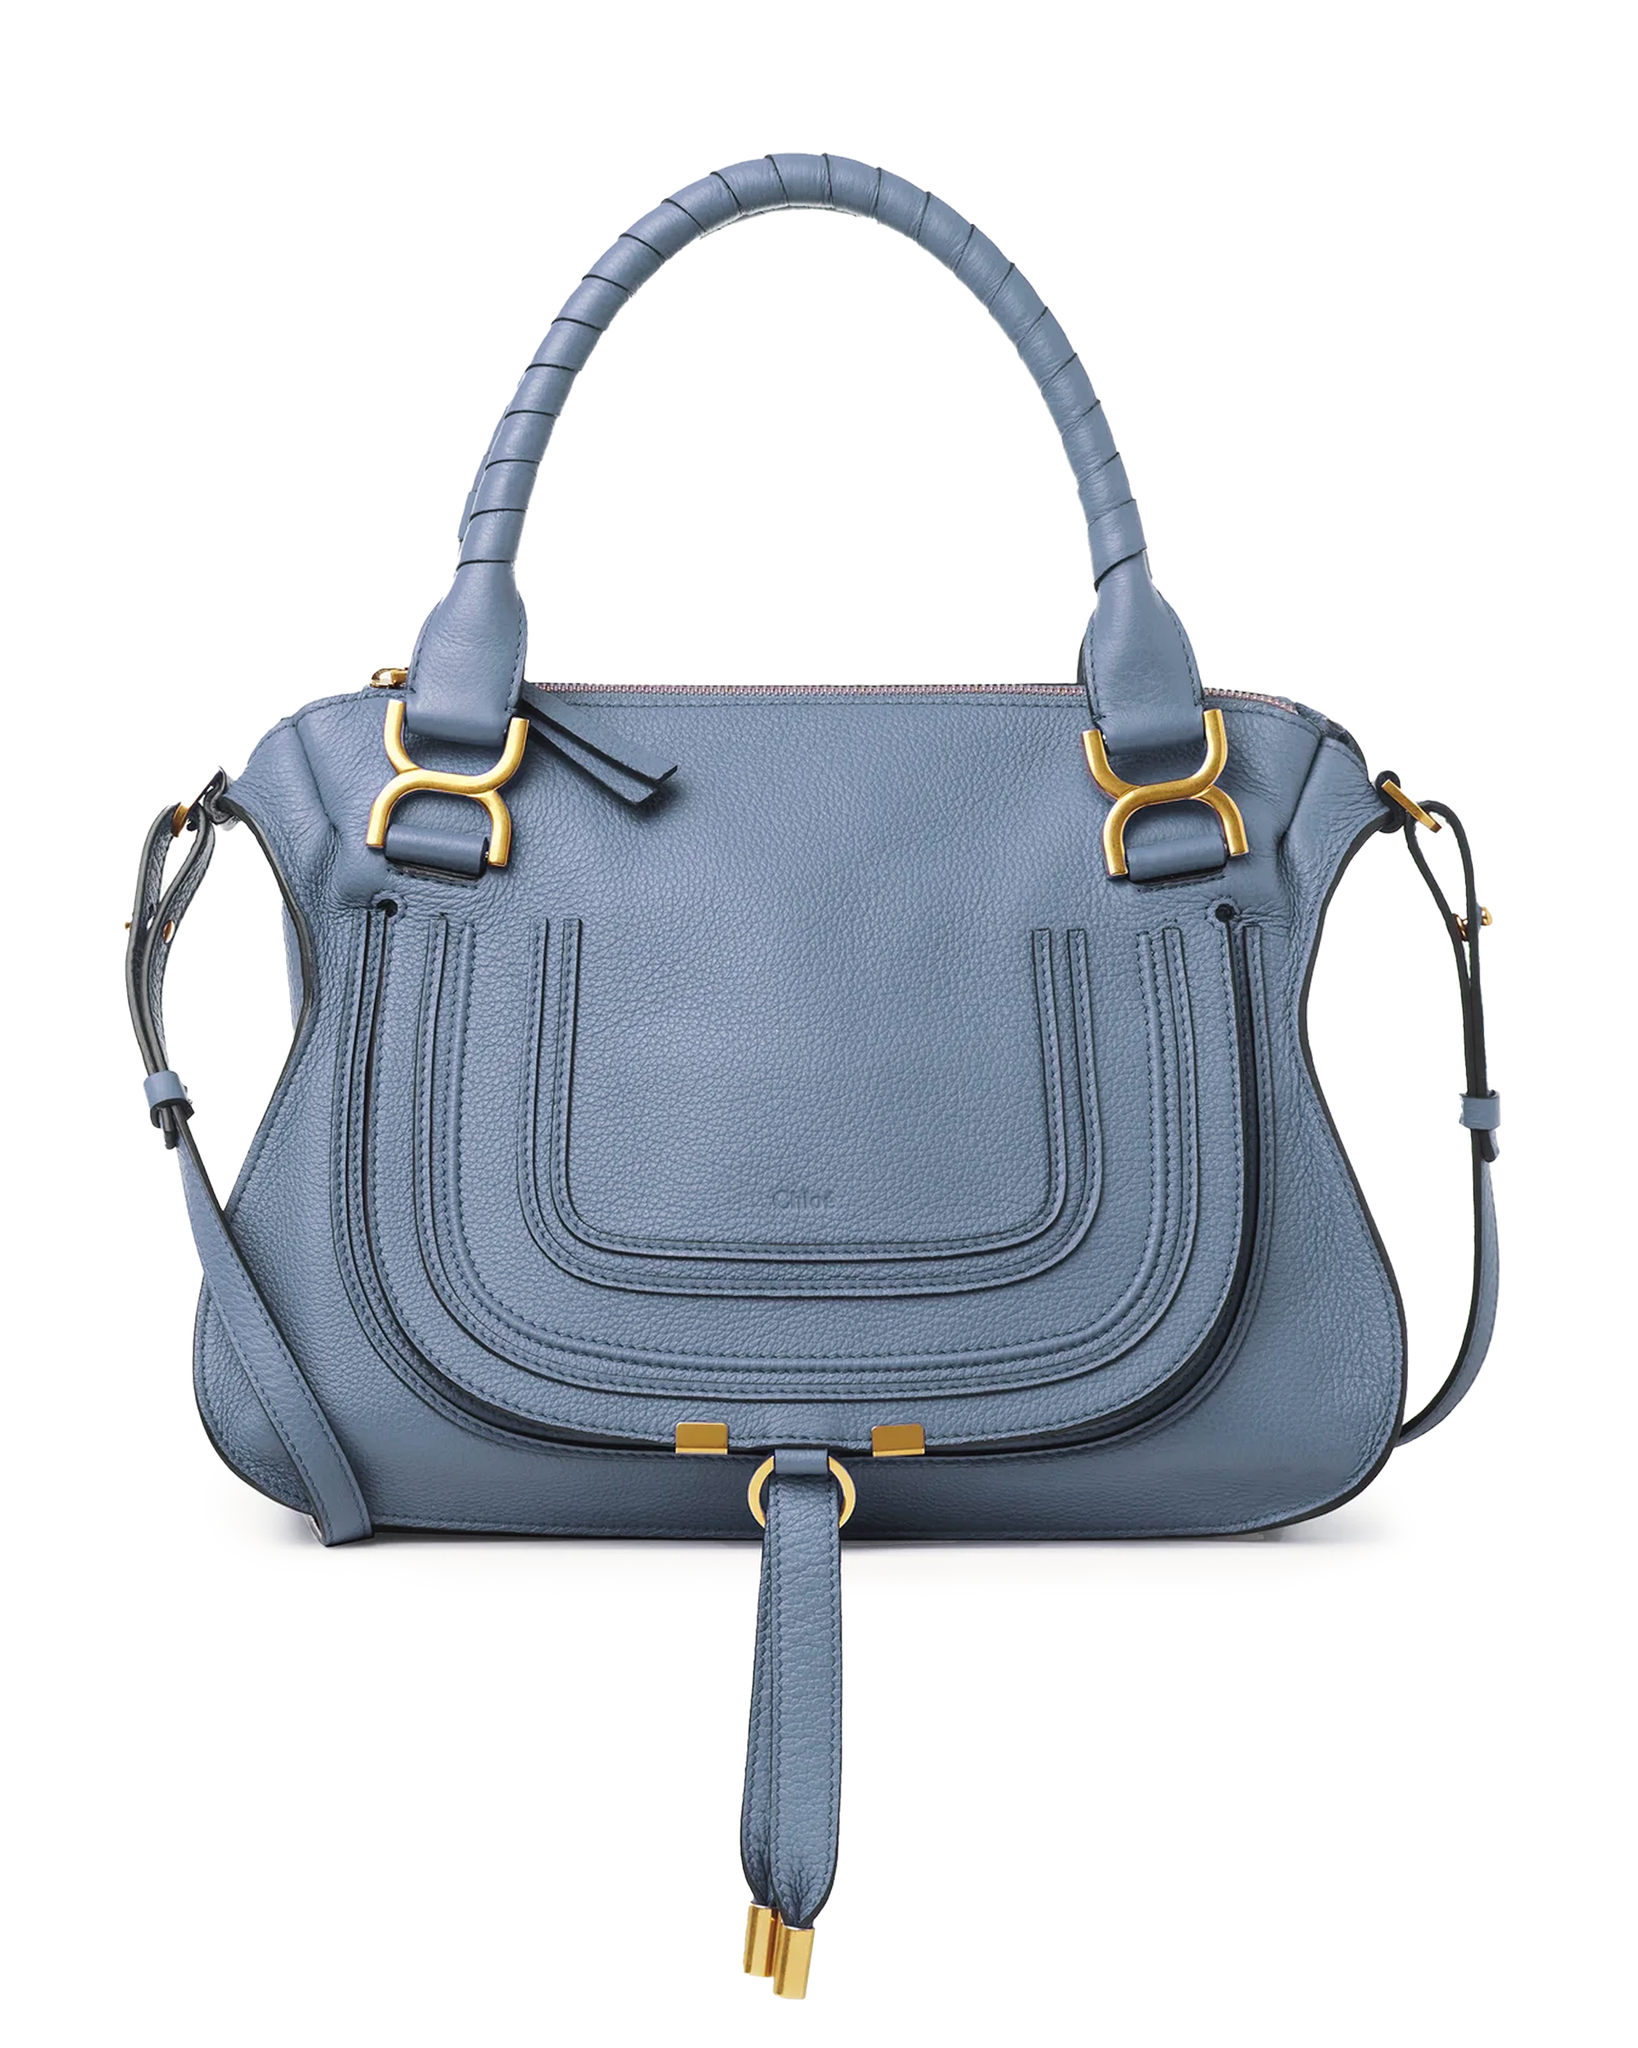 Marcie Small Double Carry Satchel in Shady Cobalt